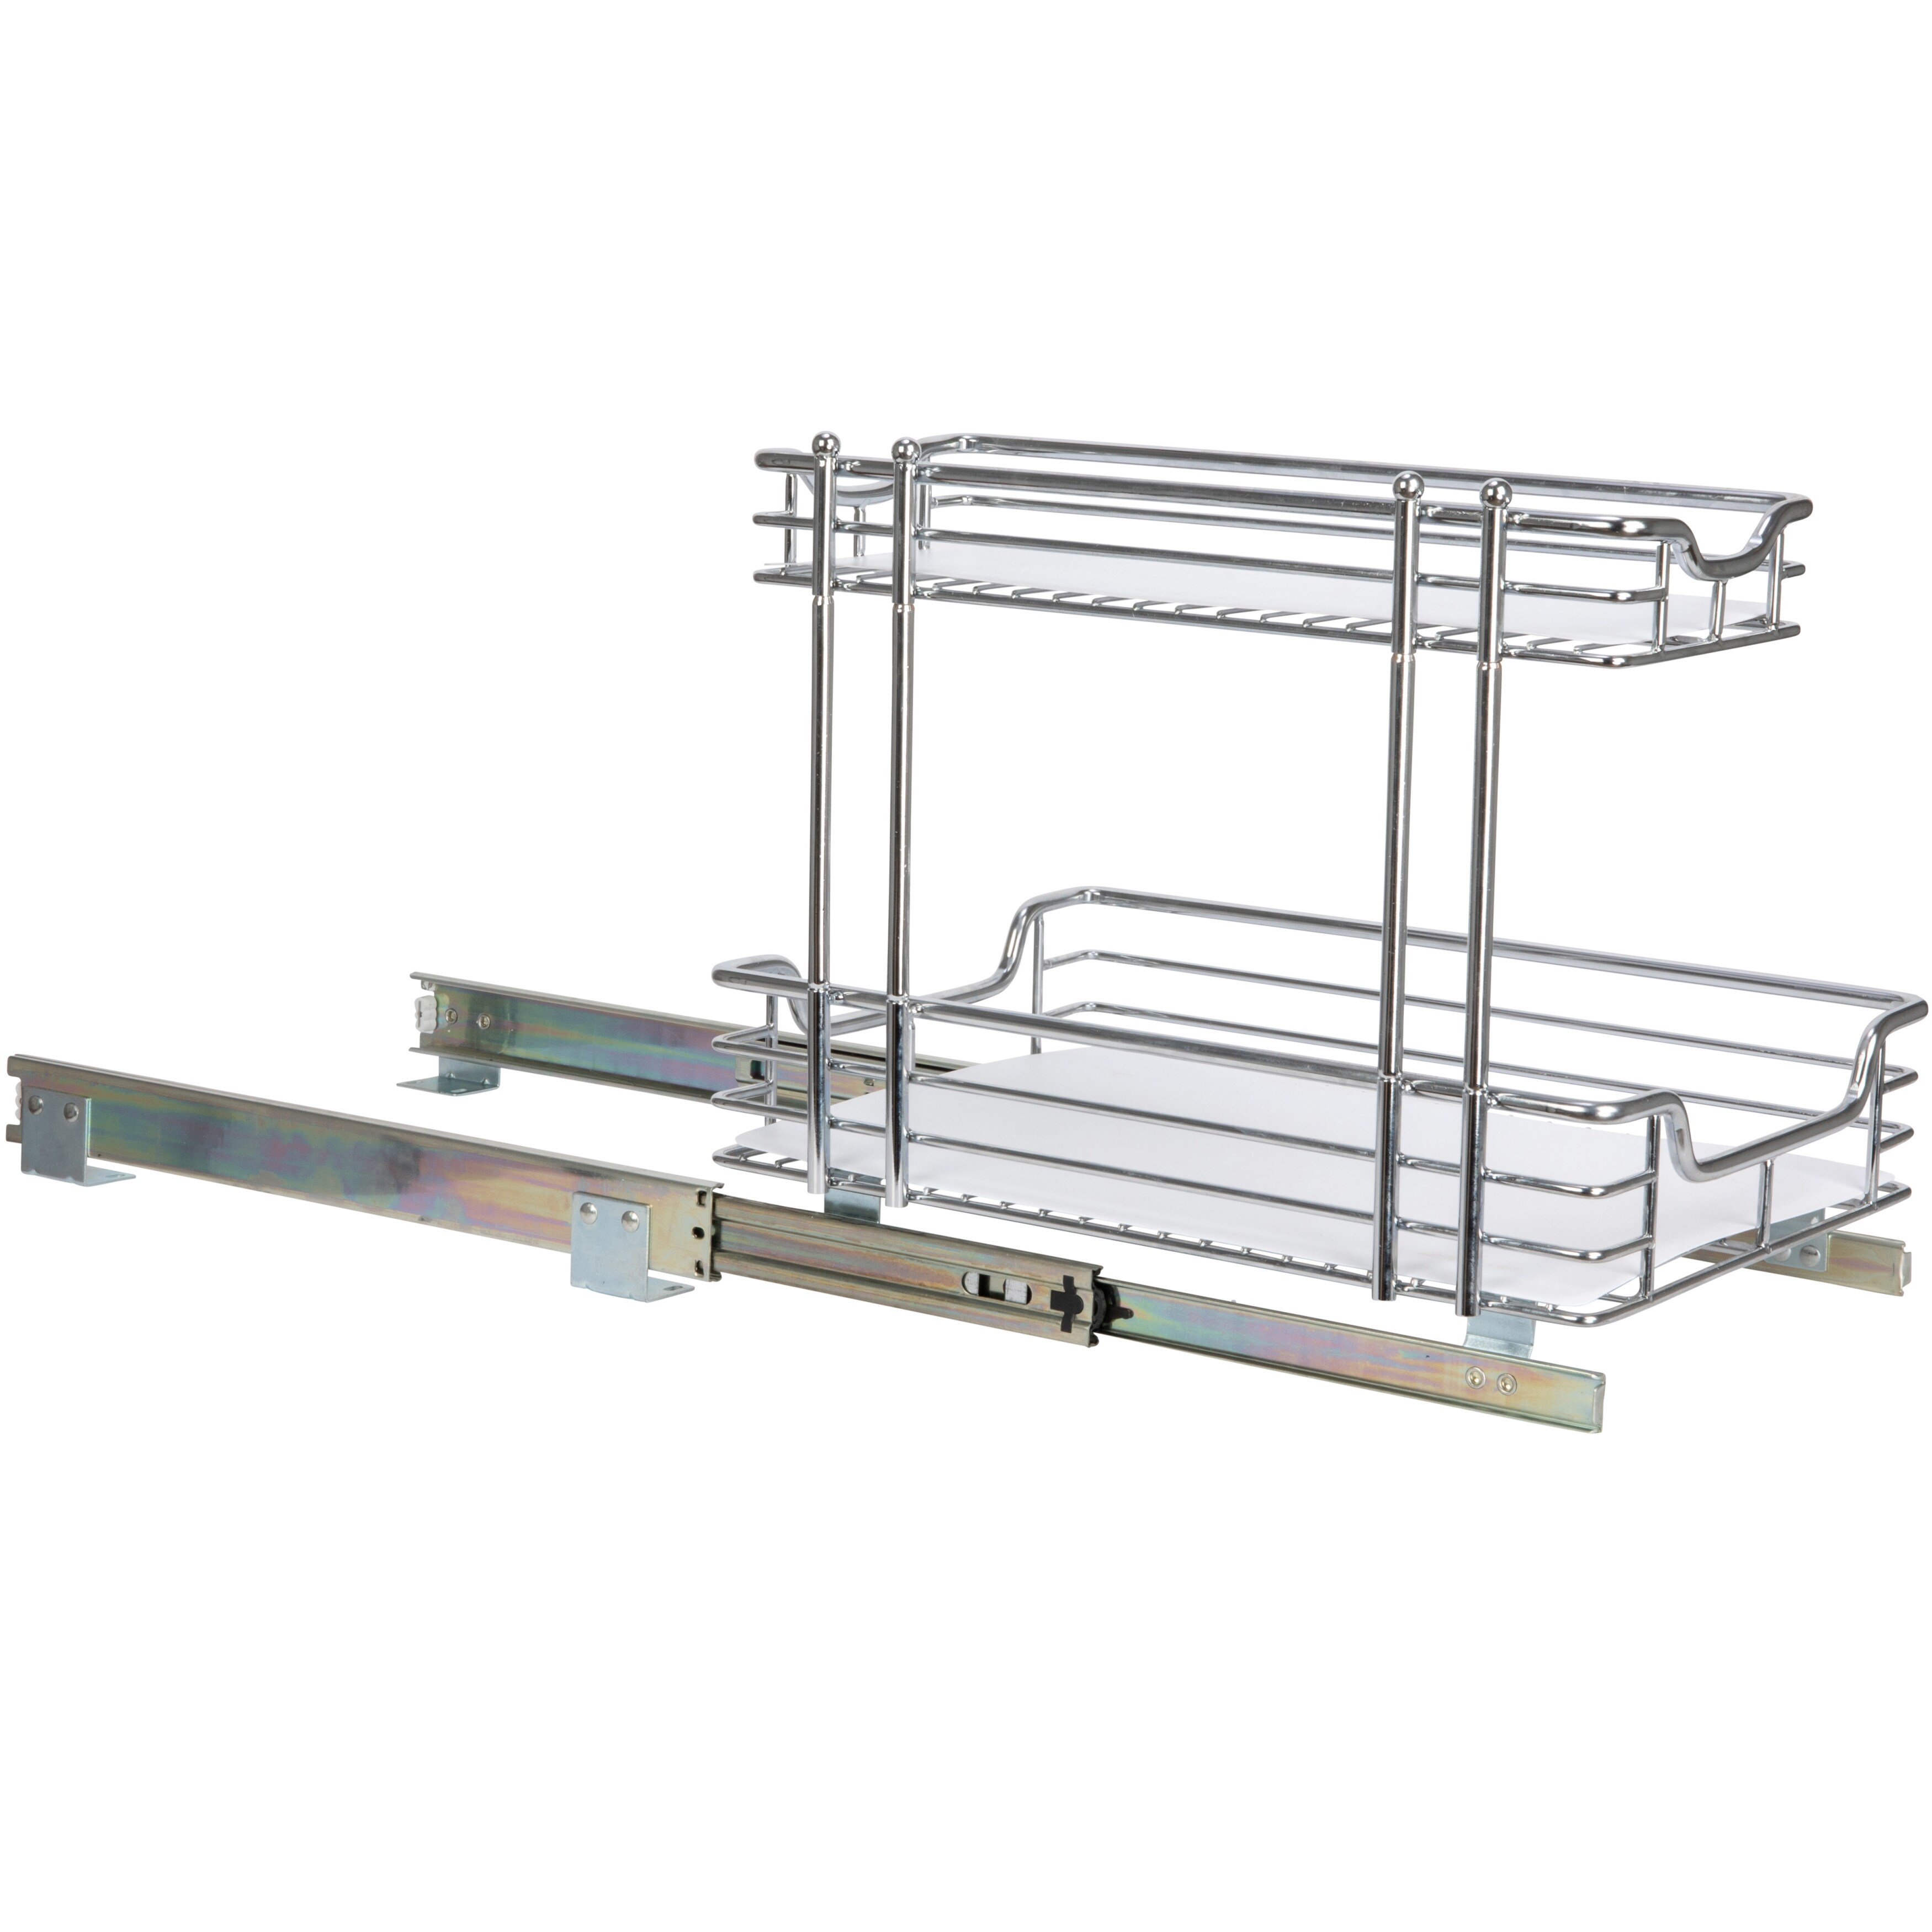 https://ak1.ostkcdn.com/images/products/is/images/direct/c8d3edcb4ec8db0df75de4bb7f06d7e68bfb93f9/Glidez-2-Tier-Steel-Pull-Out-Slide-Out-Storage-Organizer-with-Plastic-Liners.jpg